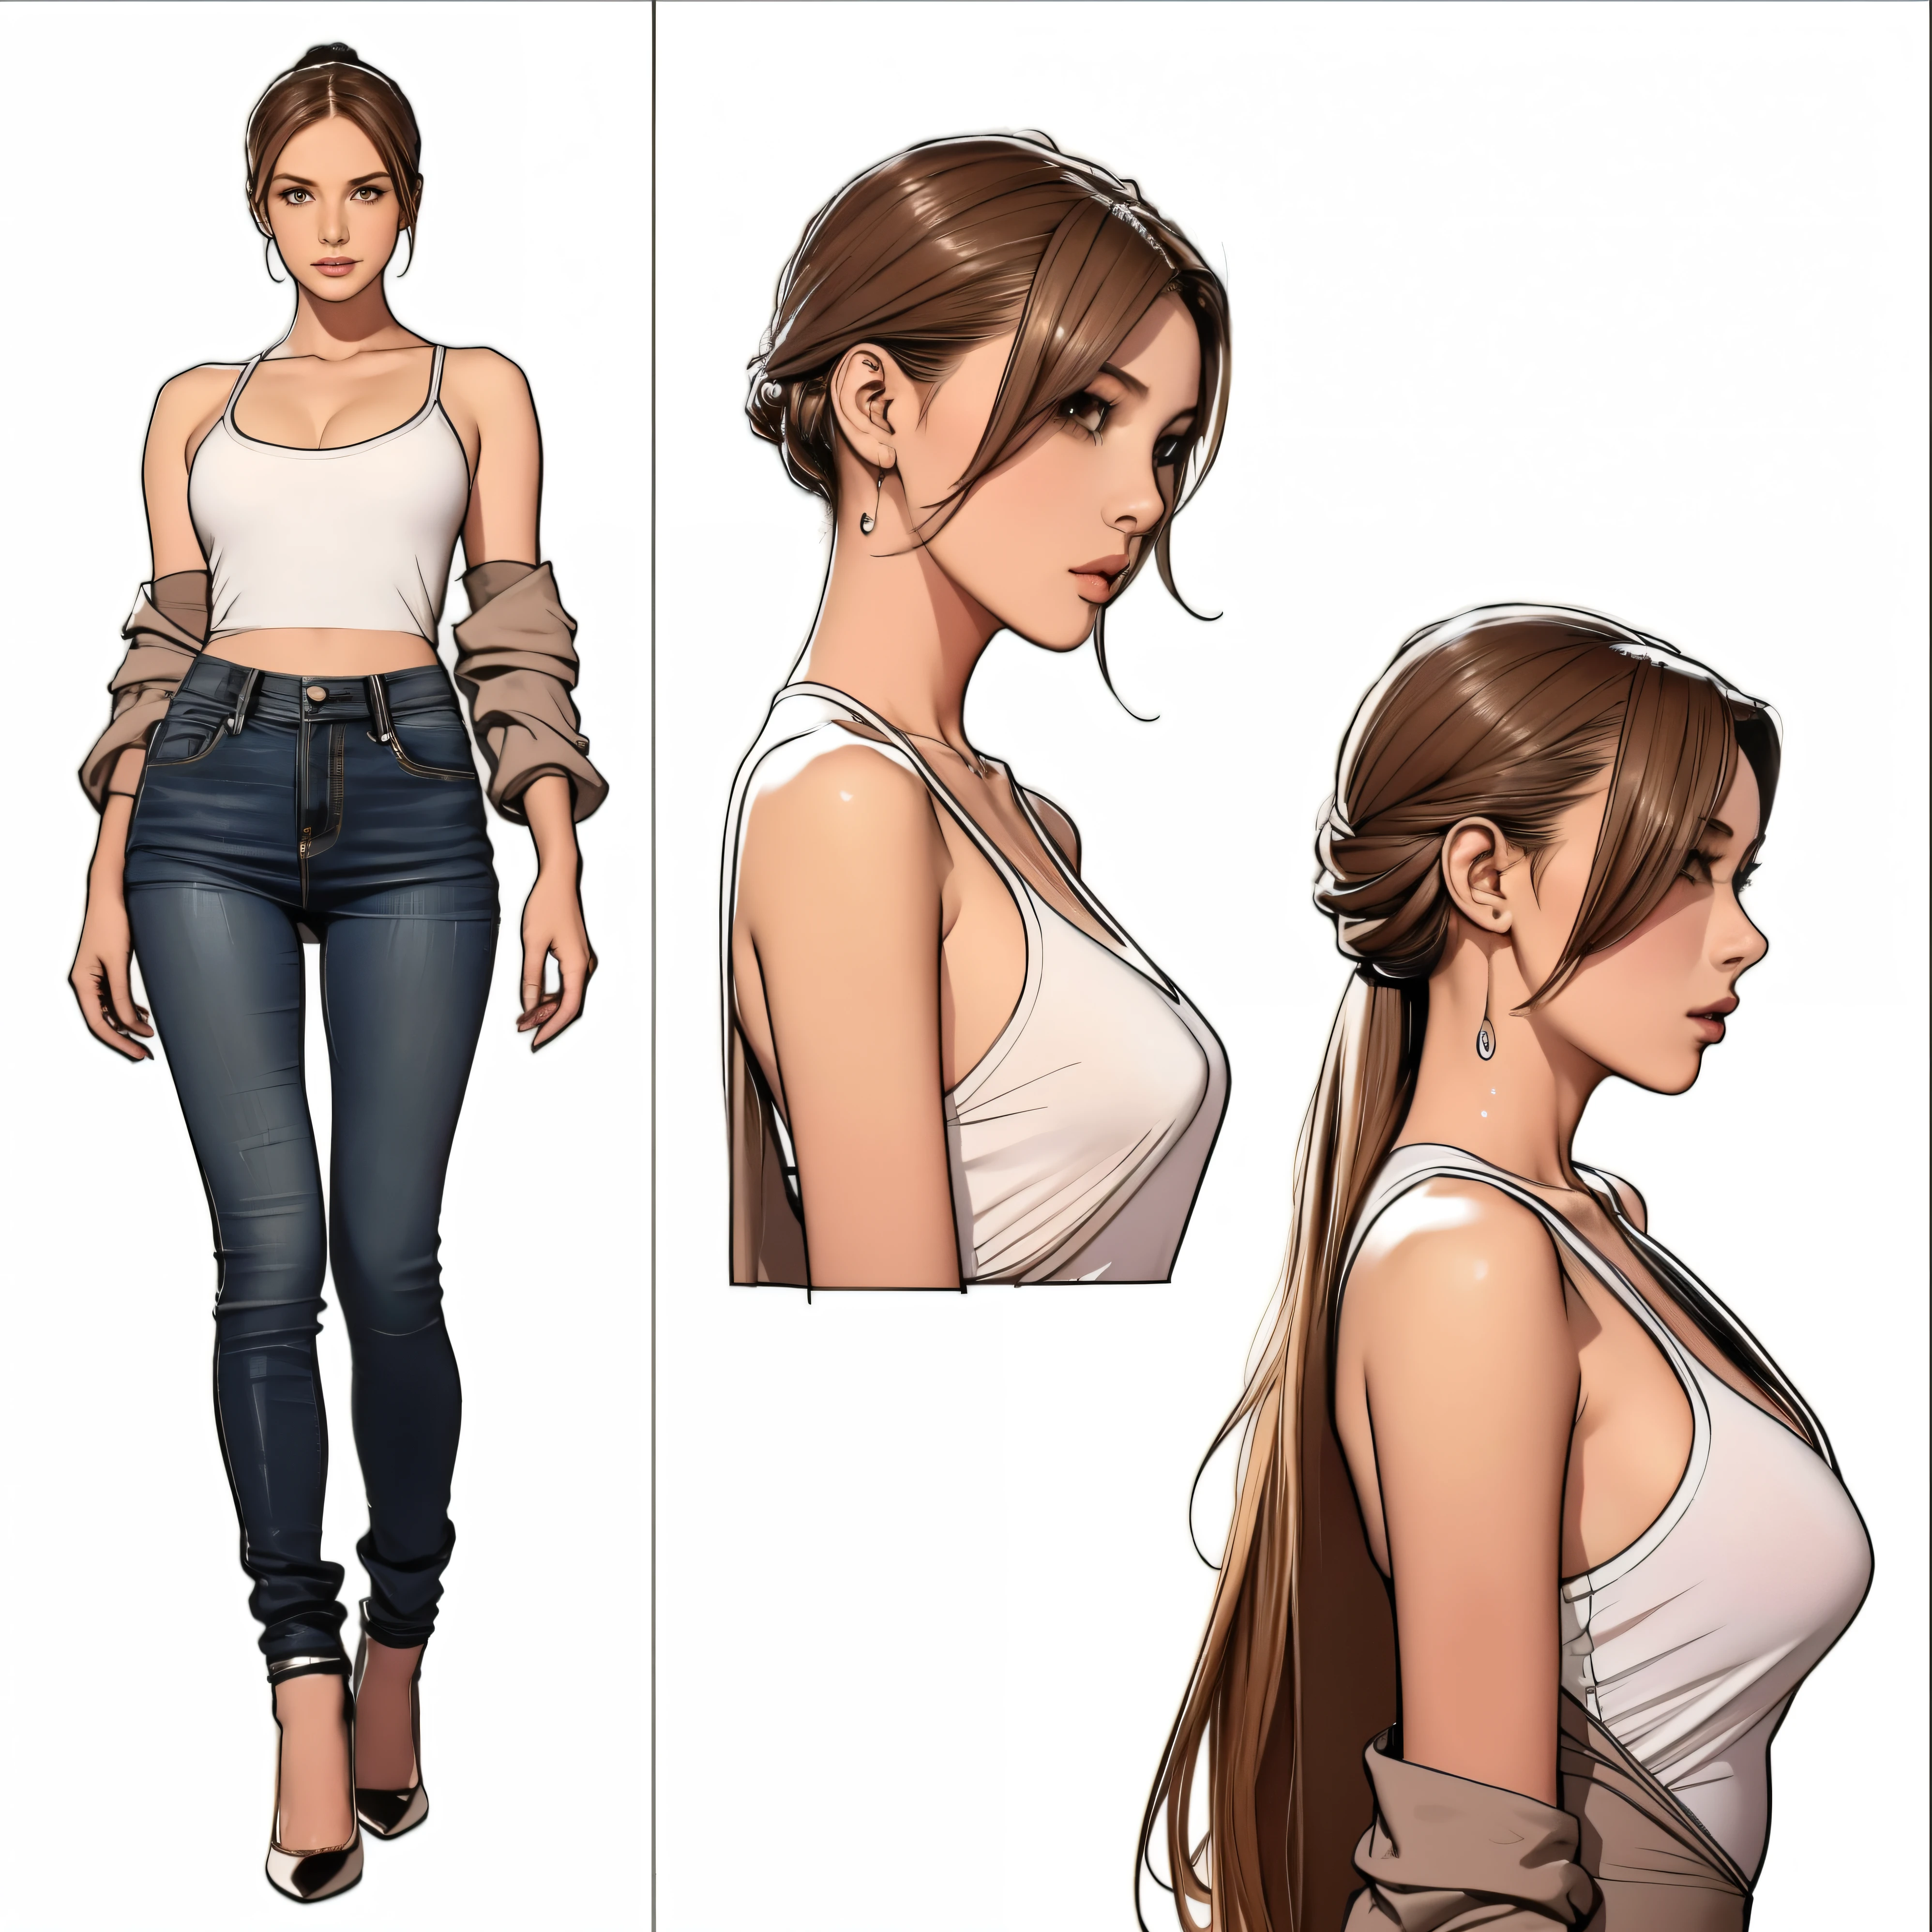 Detailed character list, Front view, side view, Diagonal view, with a white returnground, Show women, 30 years old, with short dark brown hair combed return, Wear light, casual clothing, wear tight jeans. Seats include different angles, Wait in front., return, and side views, Model Tables and Reference Tables, Full body painting. Scale based on 7.5-head scale.